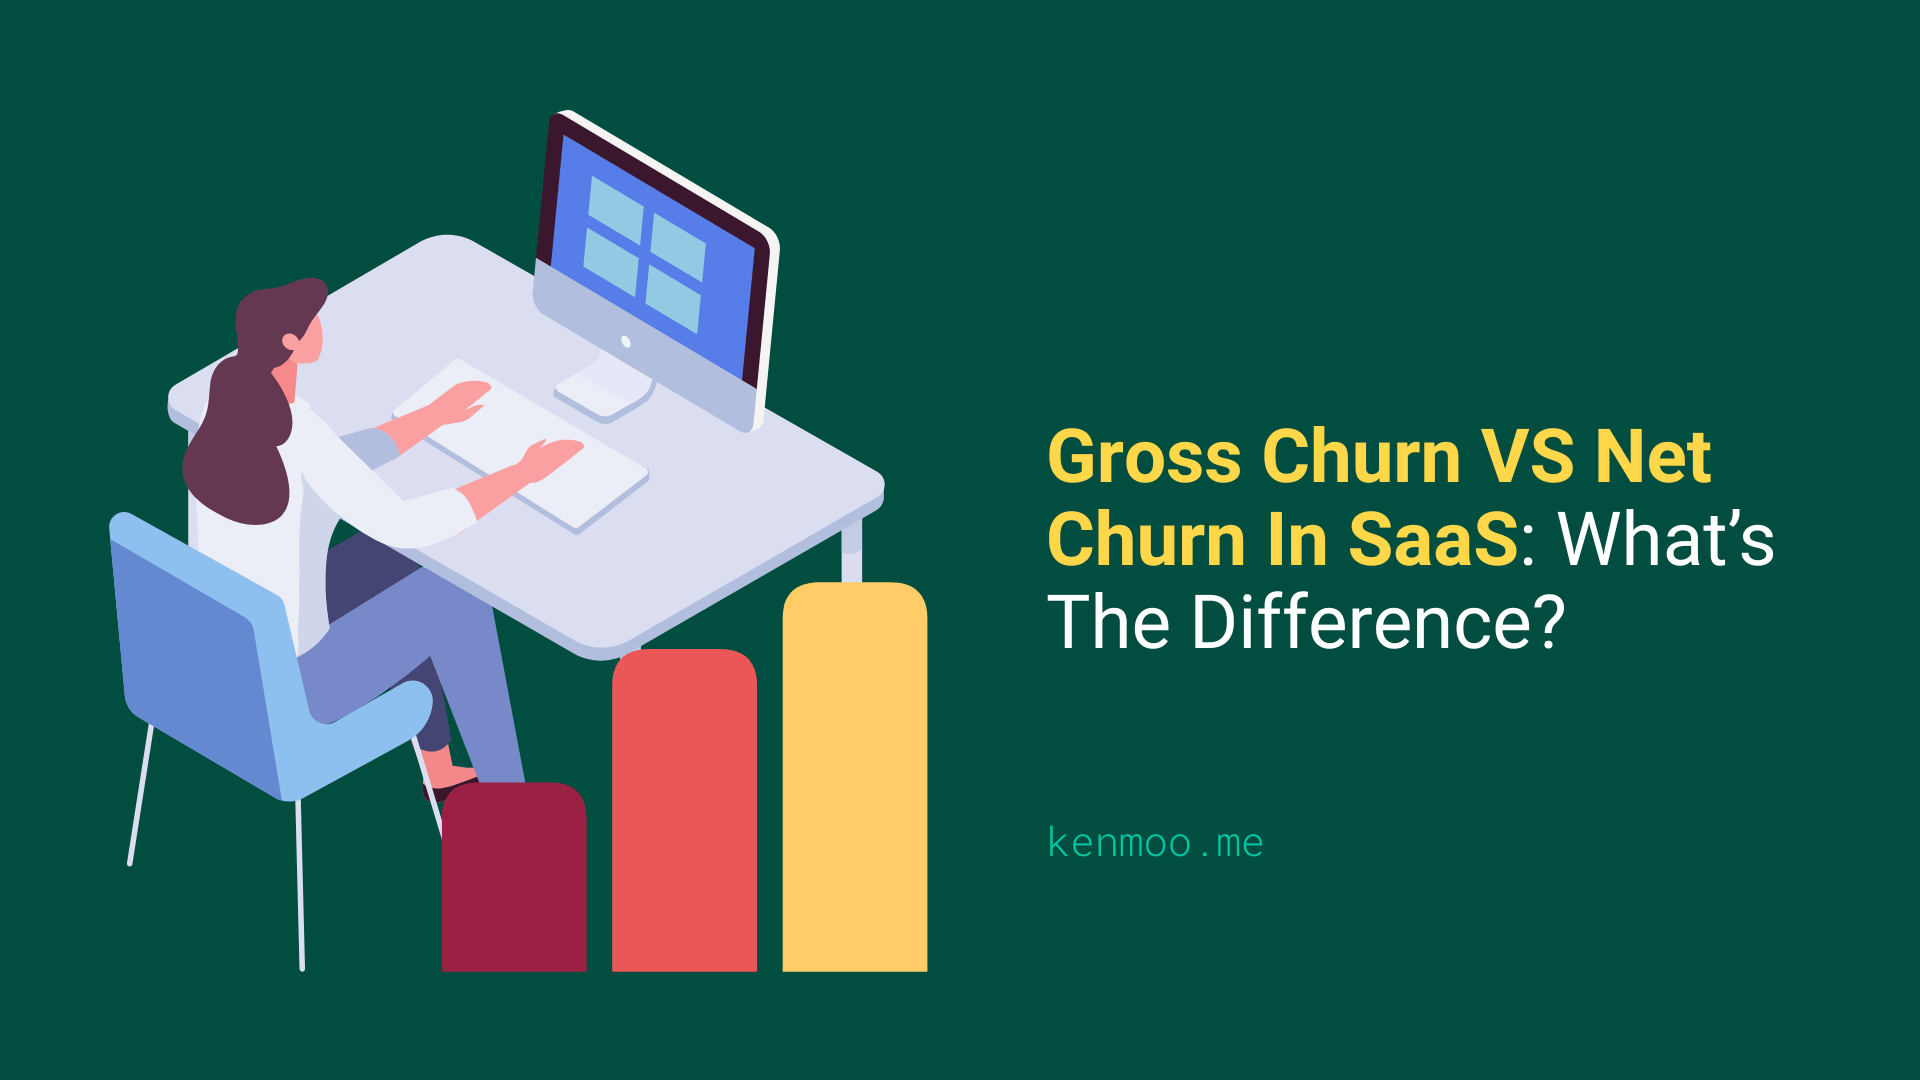 Gross Churn VS Net Churn In SaaS: What’s The Difference?